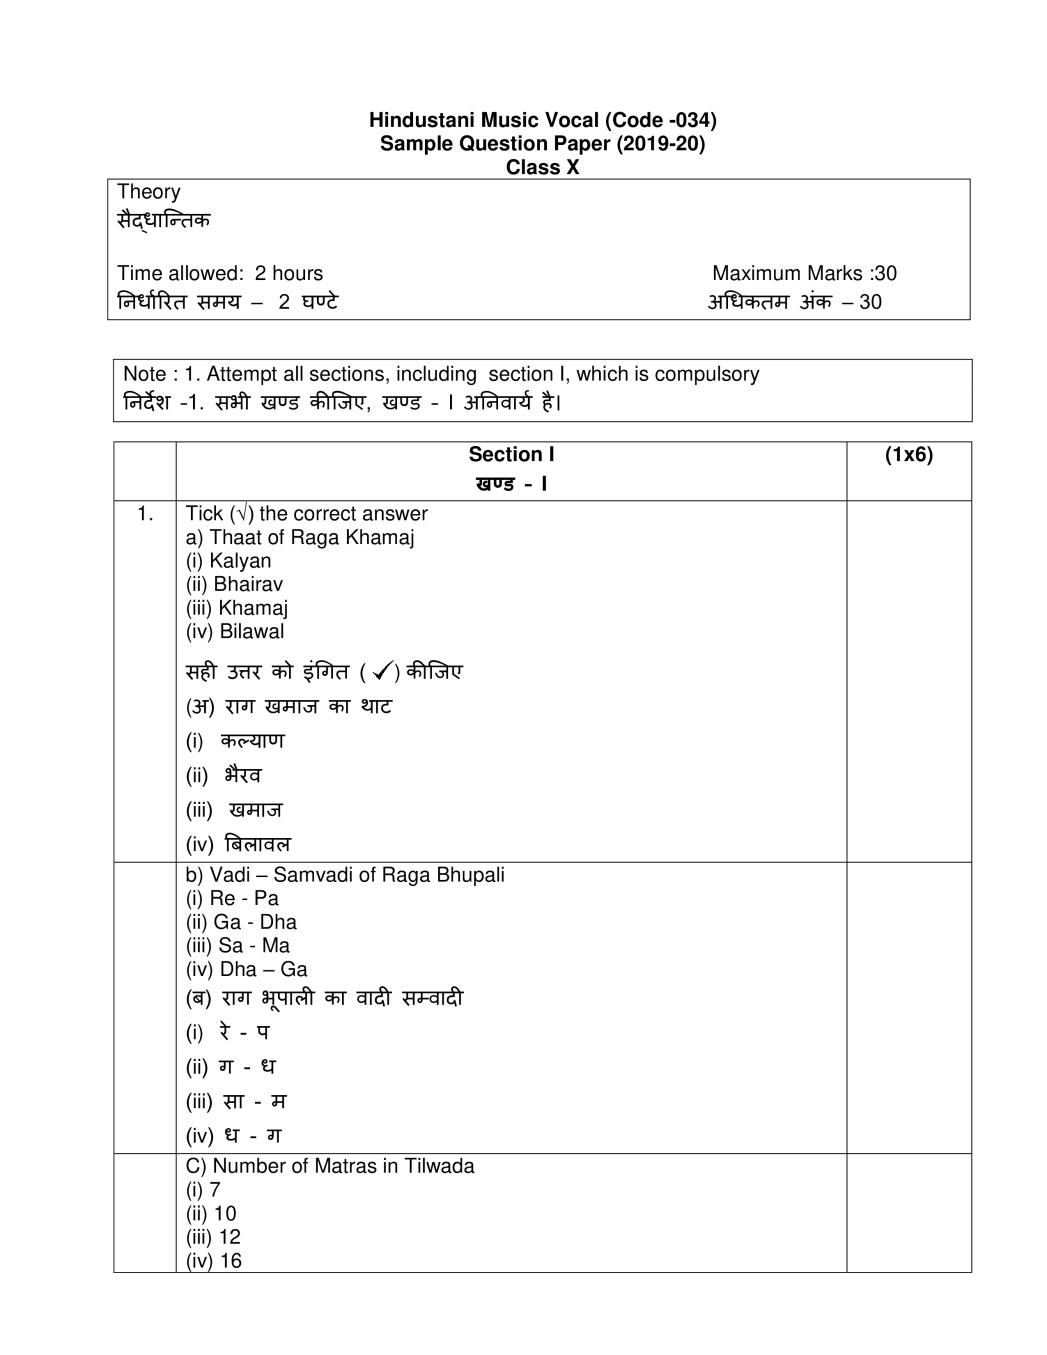 CBSE Class 10 Sample Paper 2020 for Hindustani Vocal - Page 1